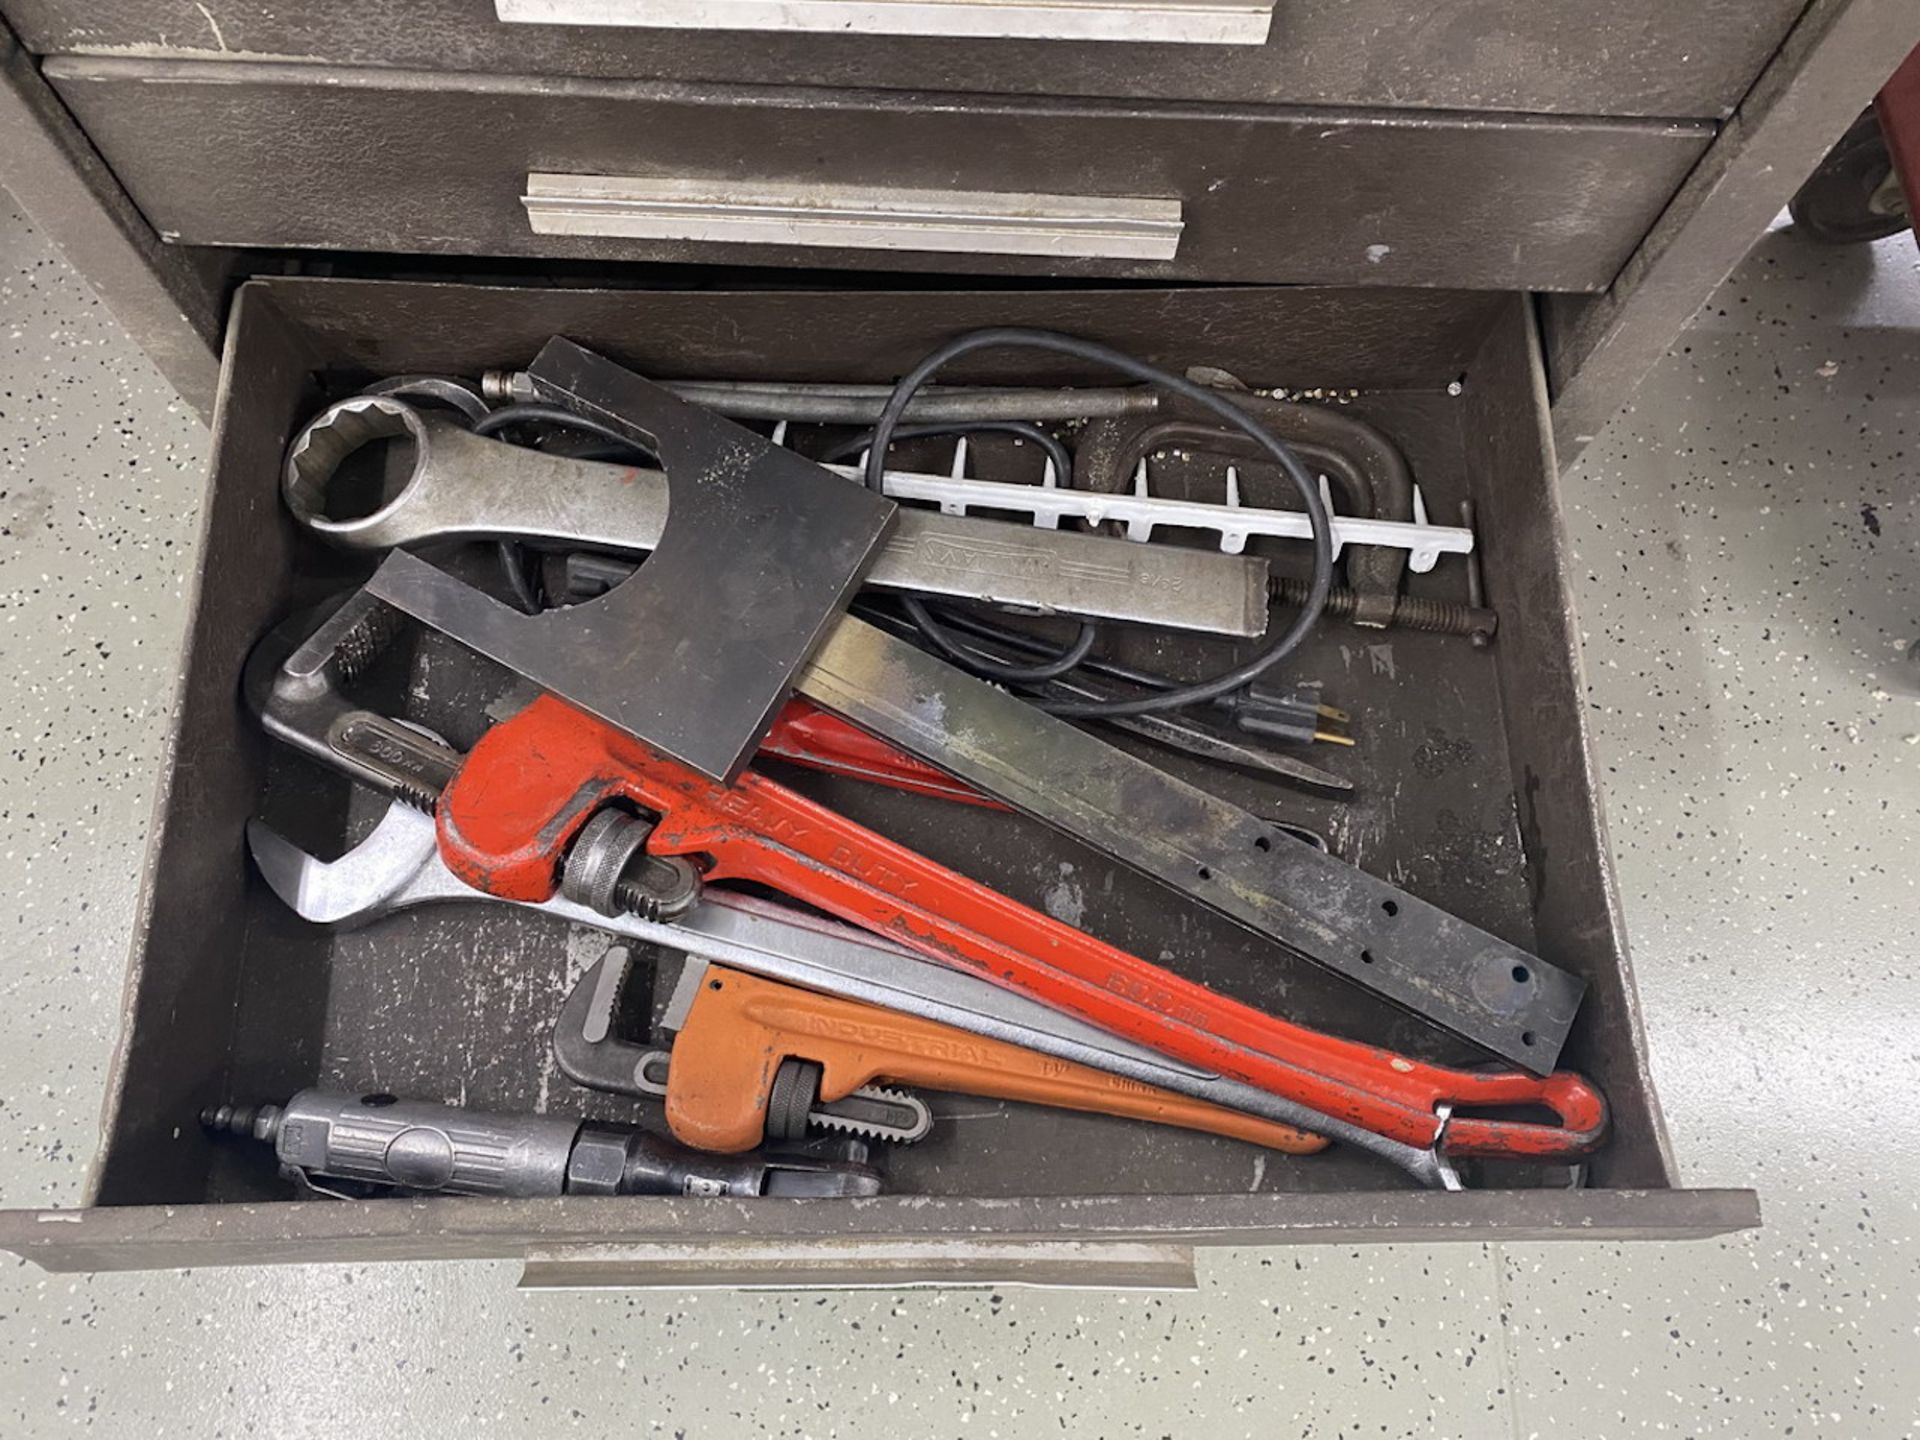 Kennedy 27" x 18" Tool Box Including Assorted Hand Tools, Wrenches, Screwdrivers and Hex Keys - Image 10 of 11